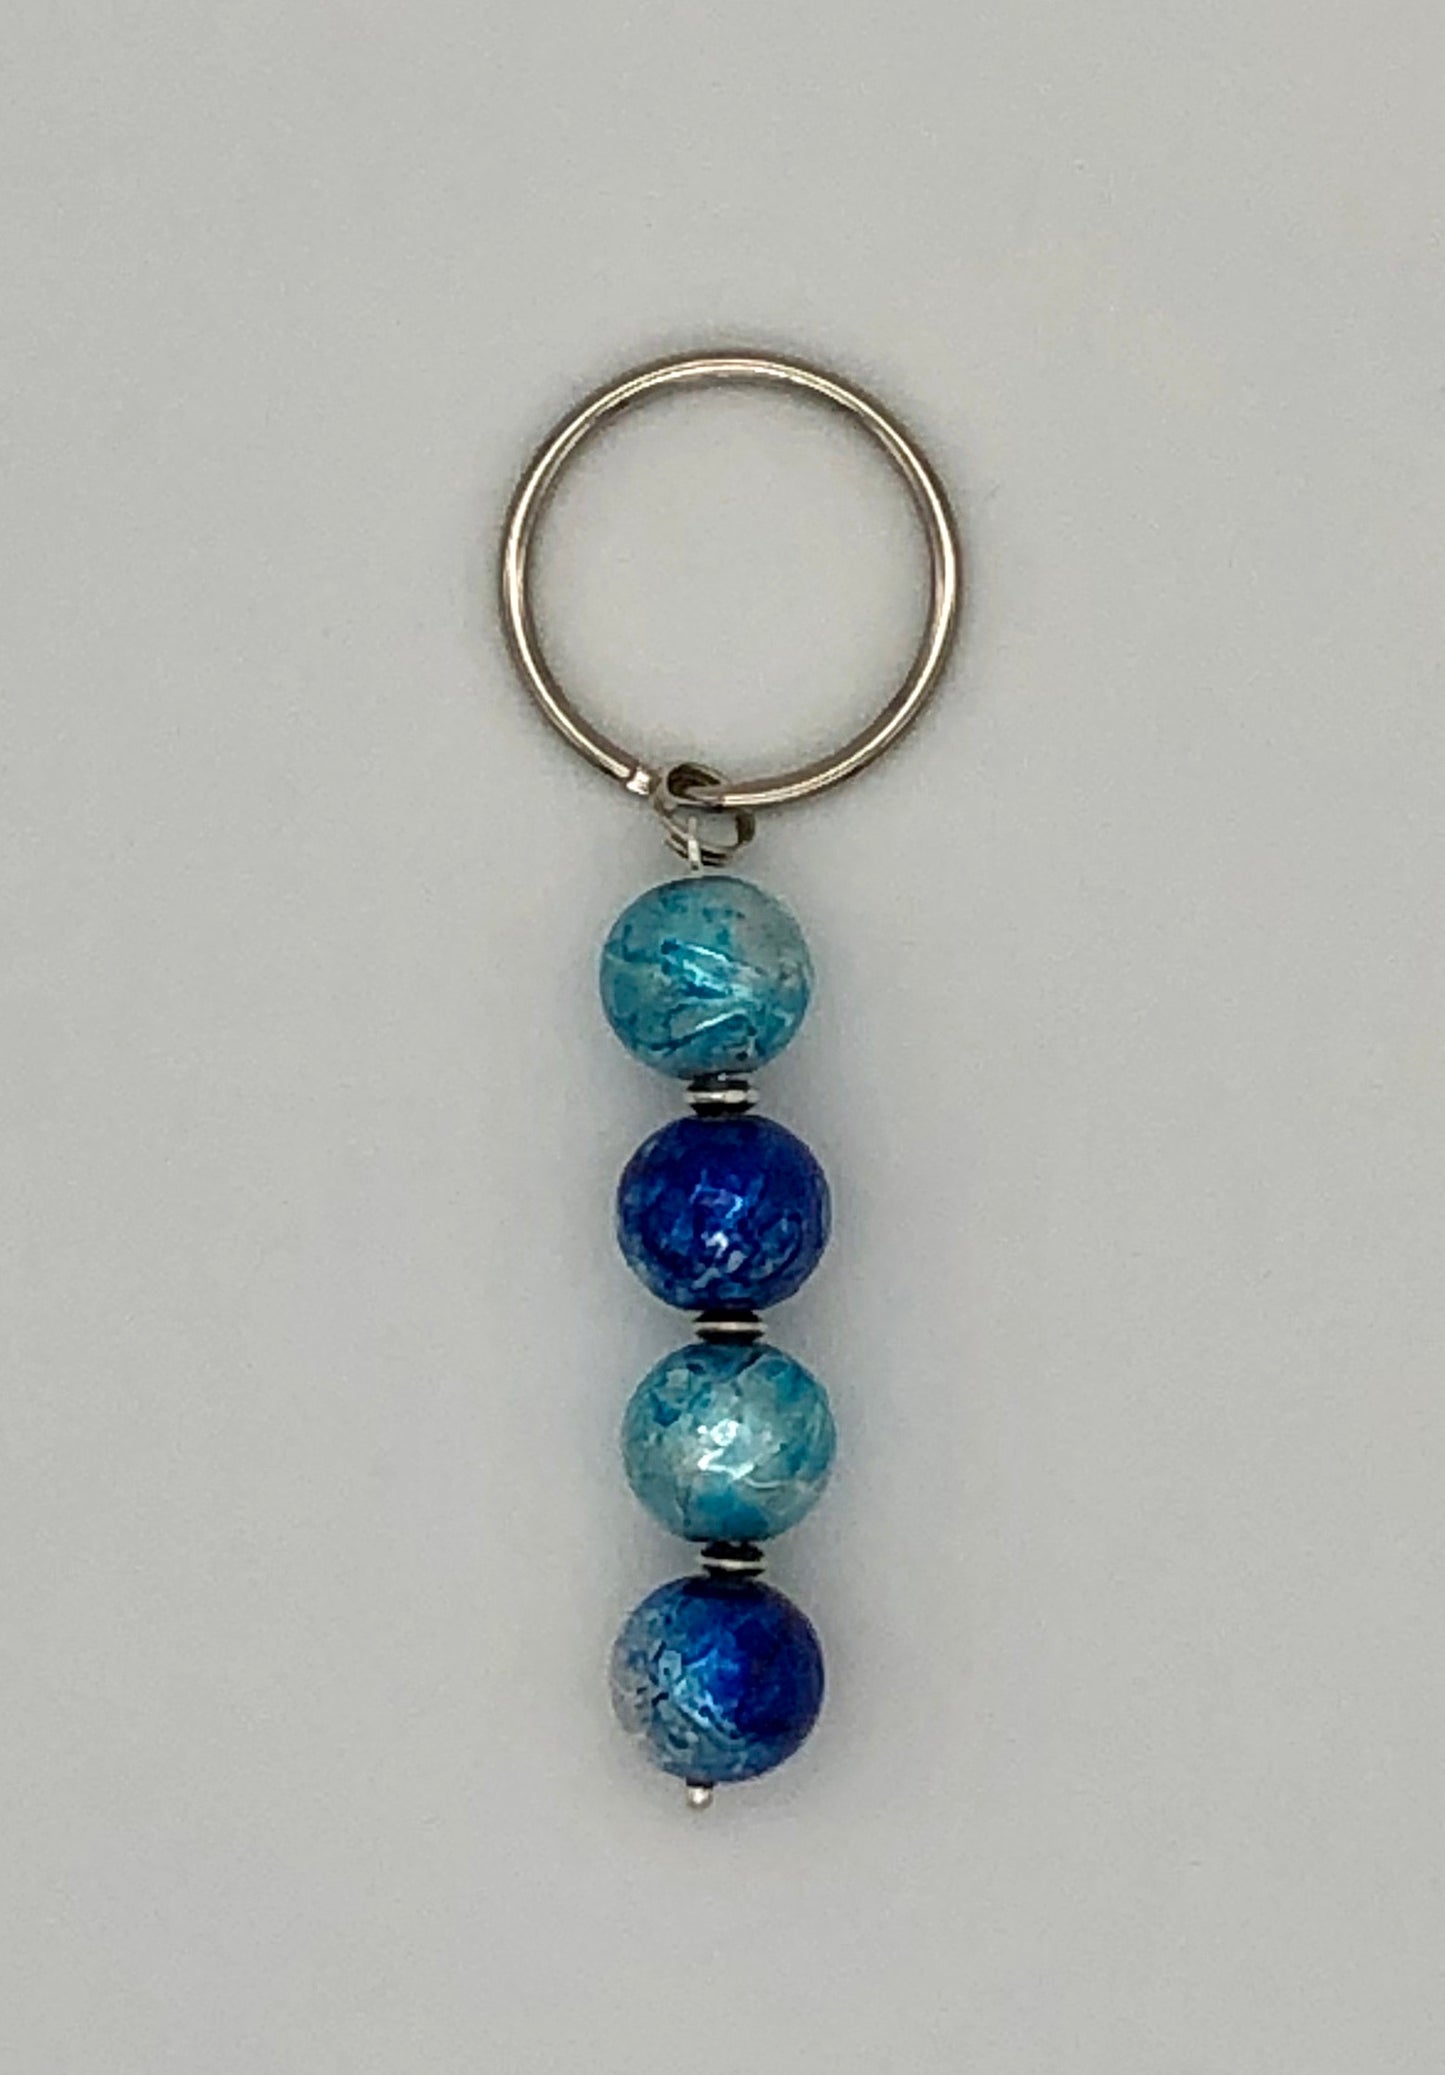 Glass bead keychains, keychains with charms